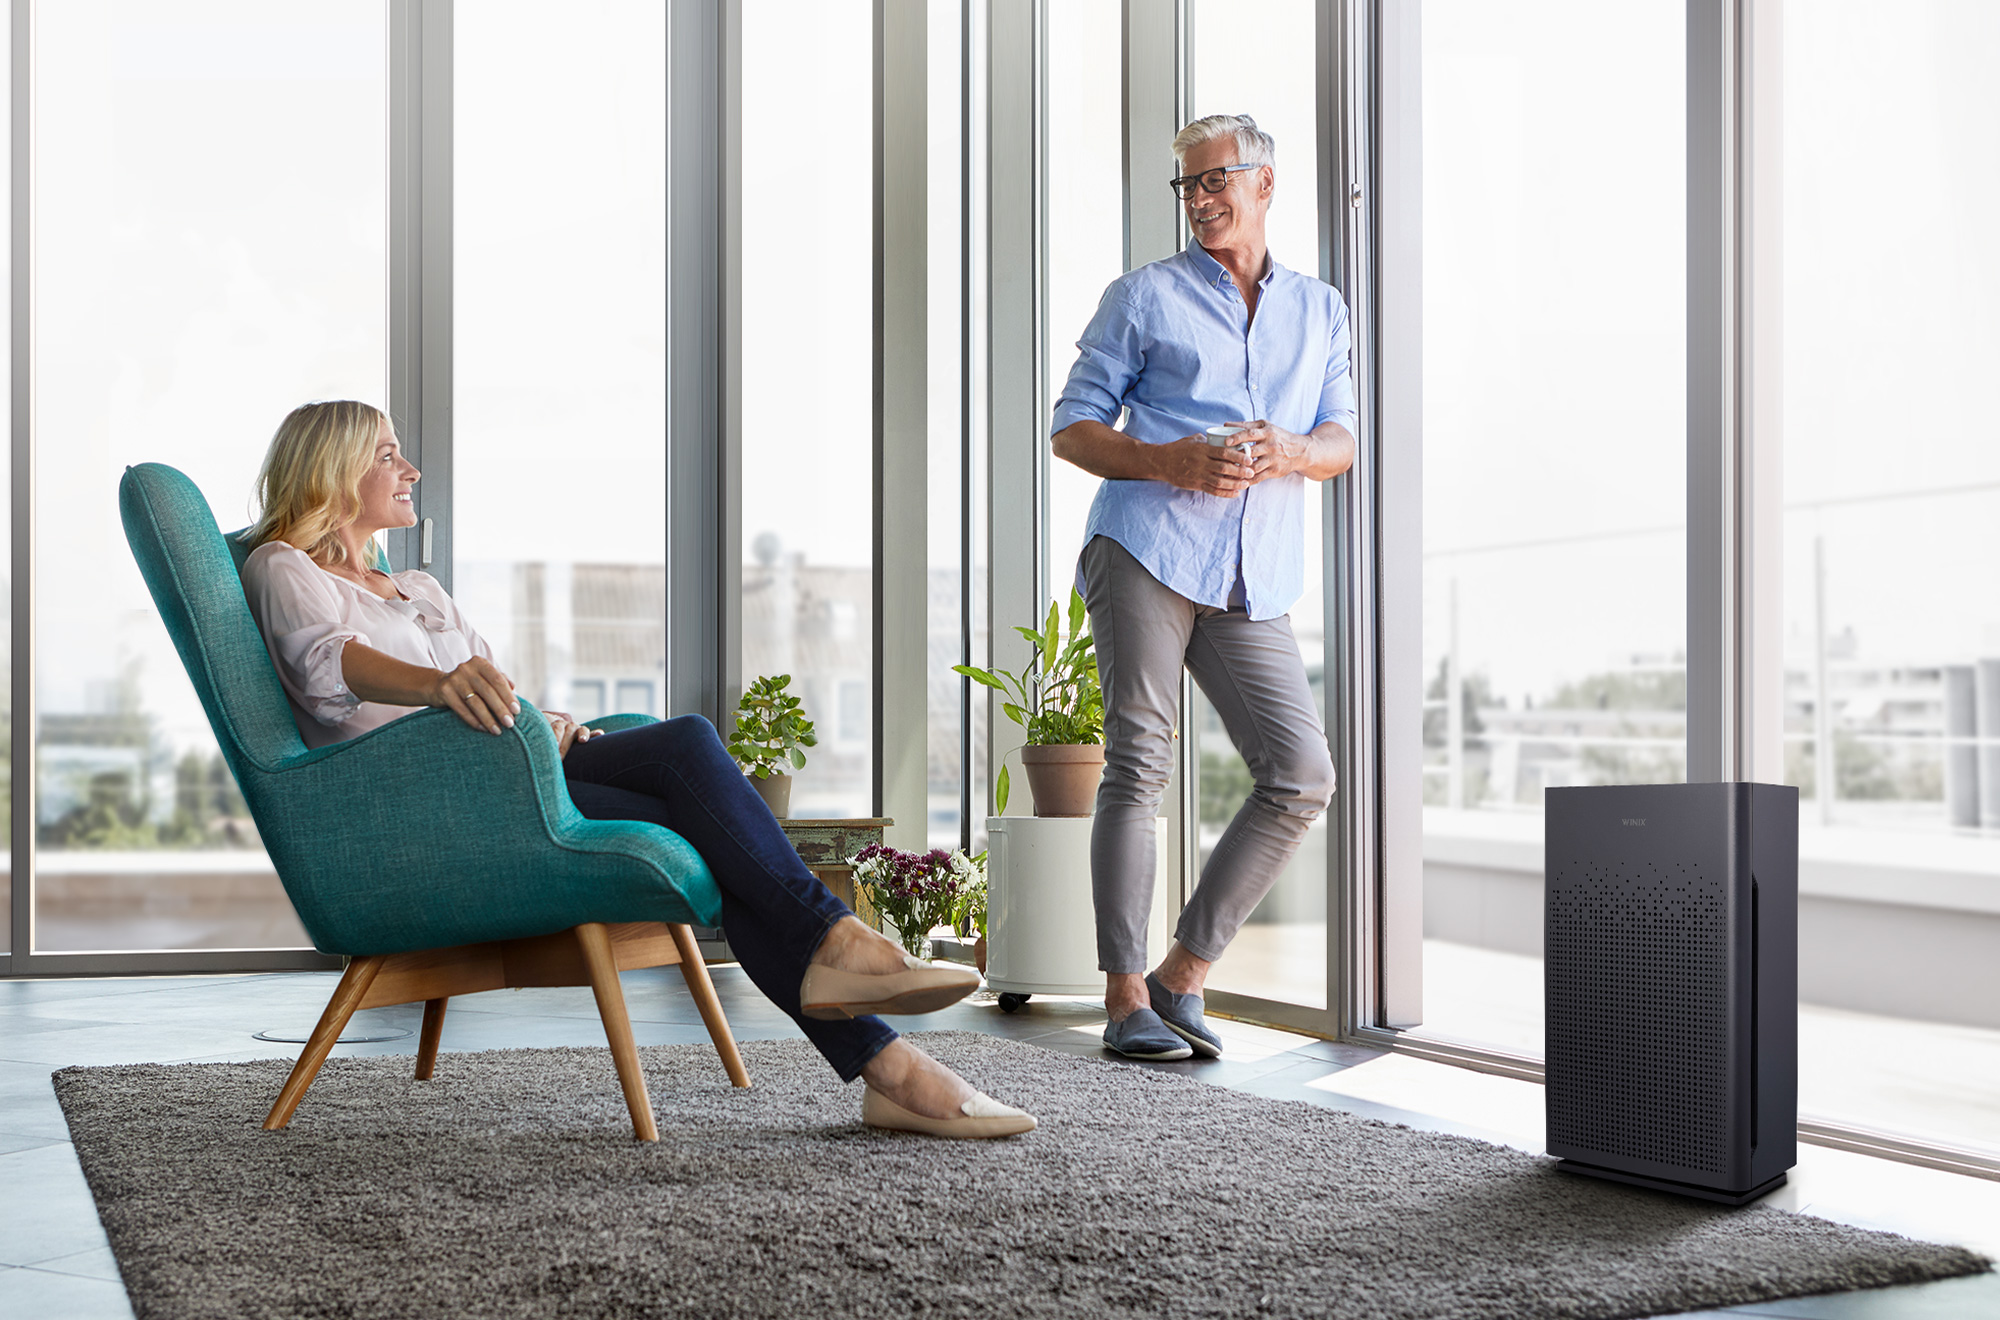 AM80 Air Purifier perfect for home environments to promote health and wellness